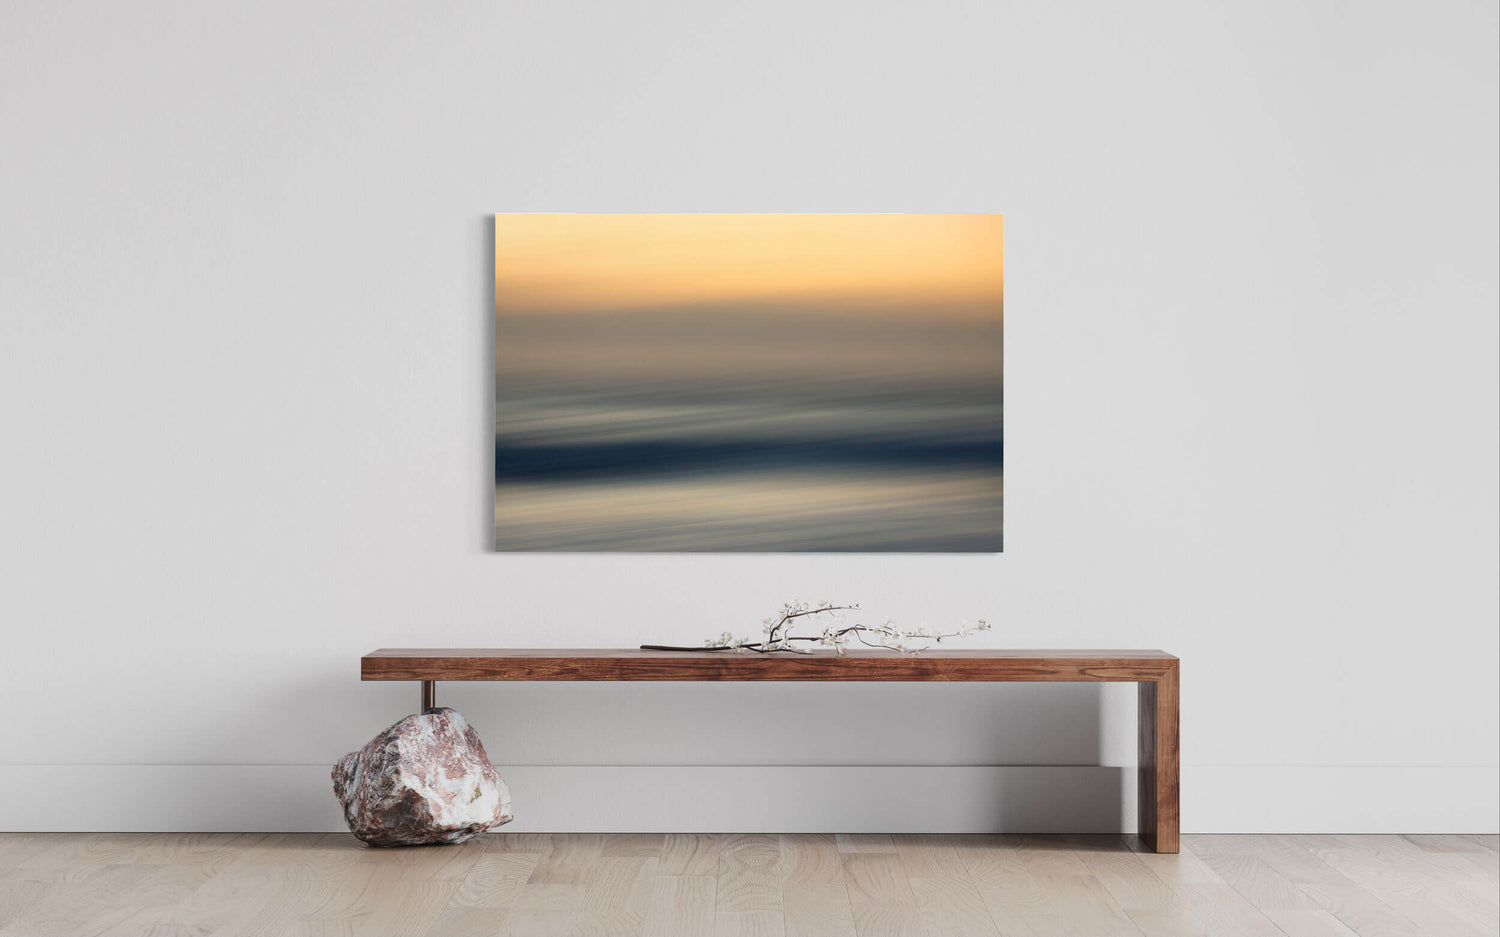 An abstract sunset picture photographed in Big Sur, California, hangs in a living room.